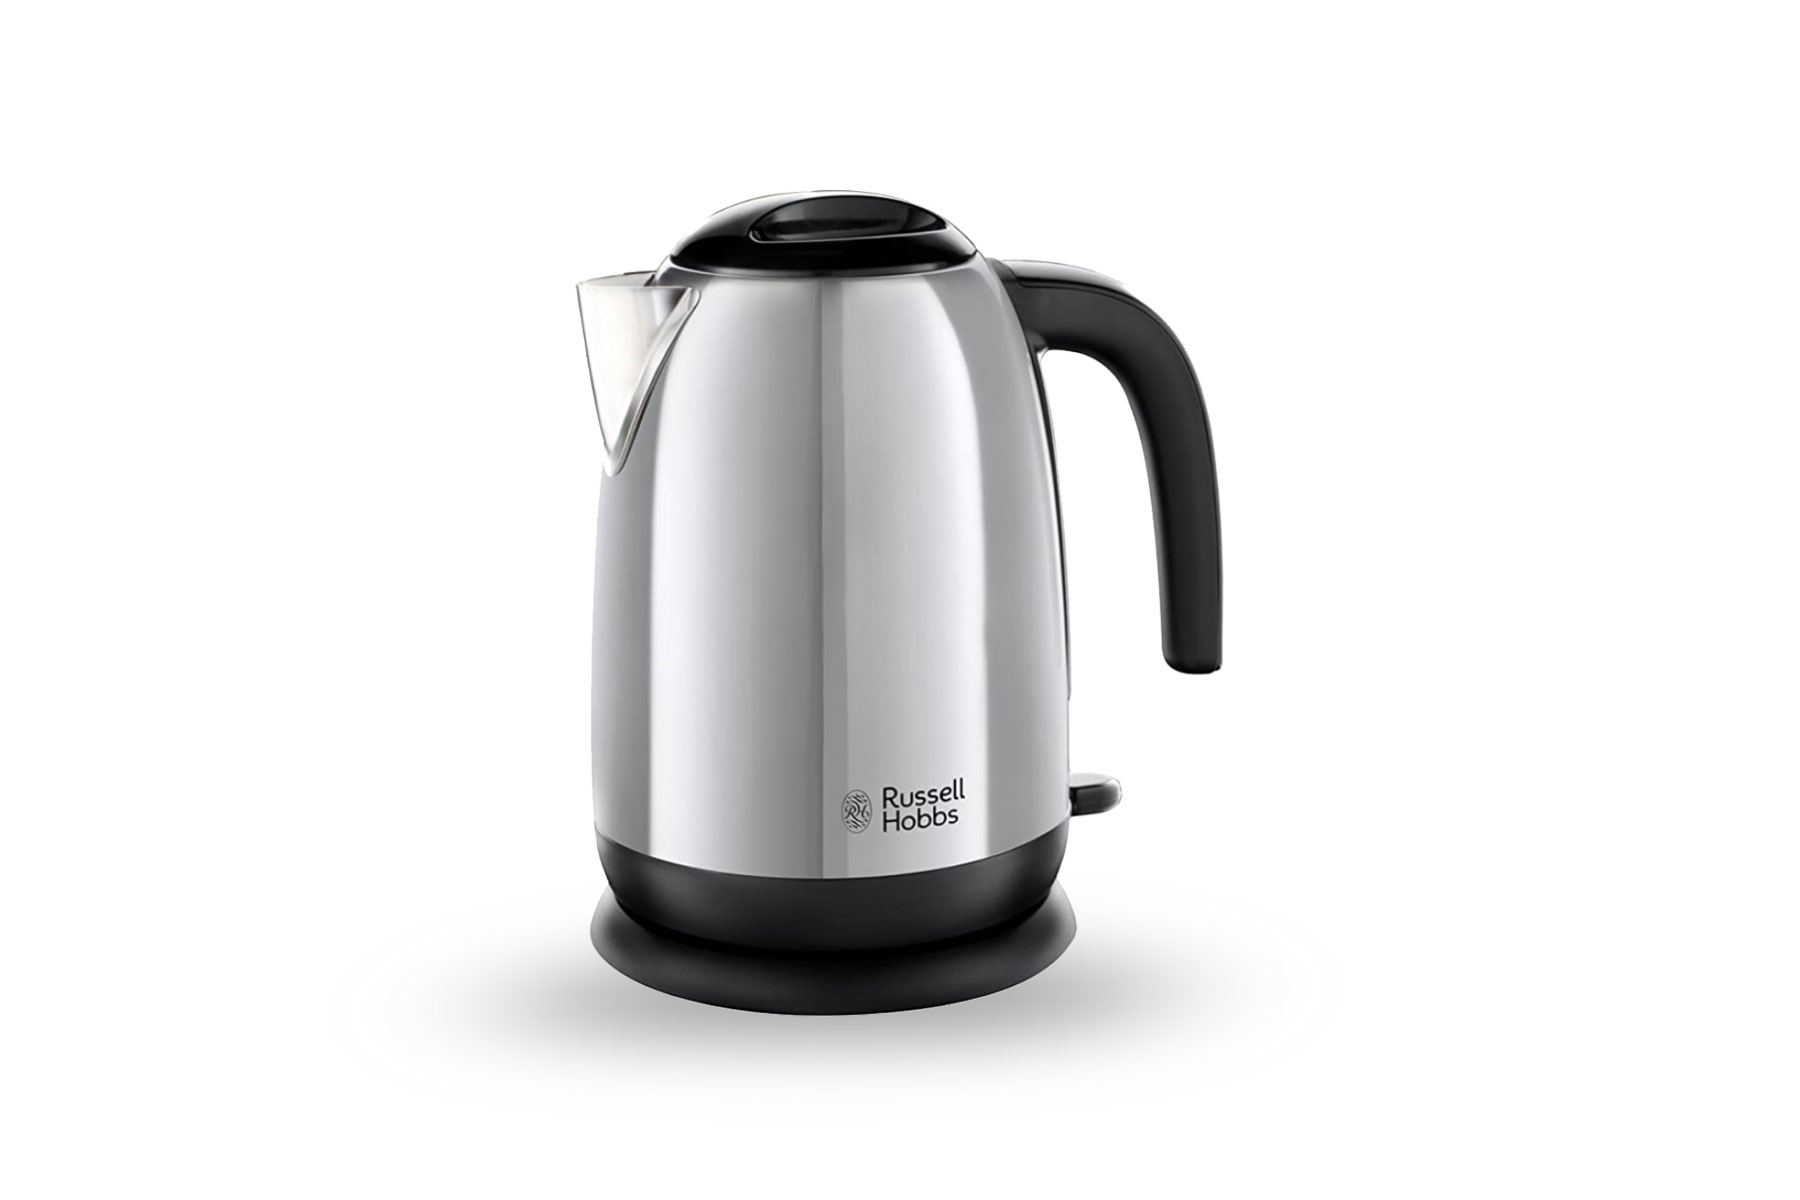 RUSSELL HOBBS KETTLE 1.7L S/S